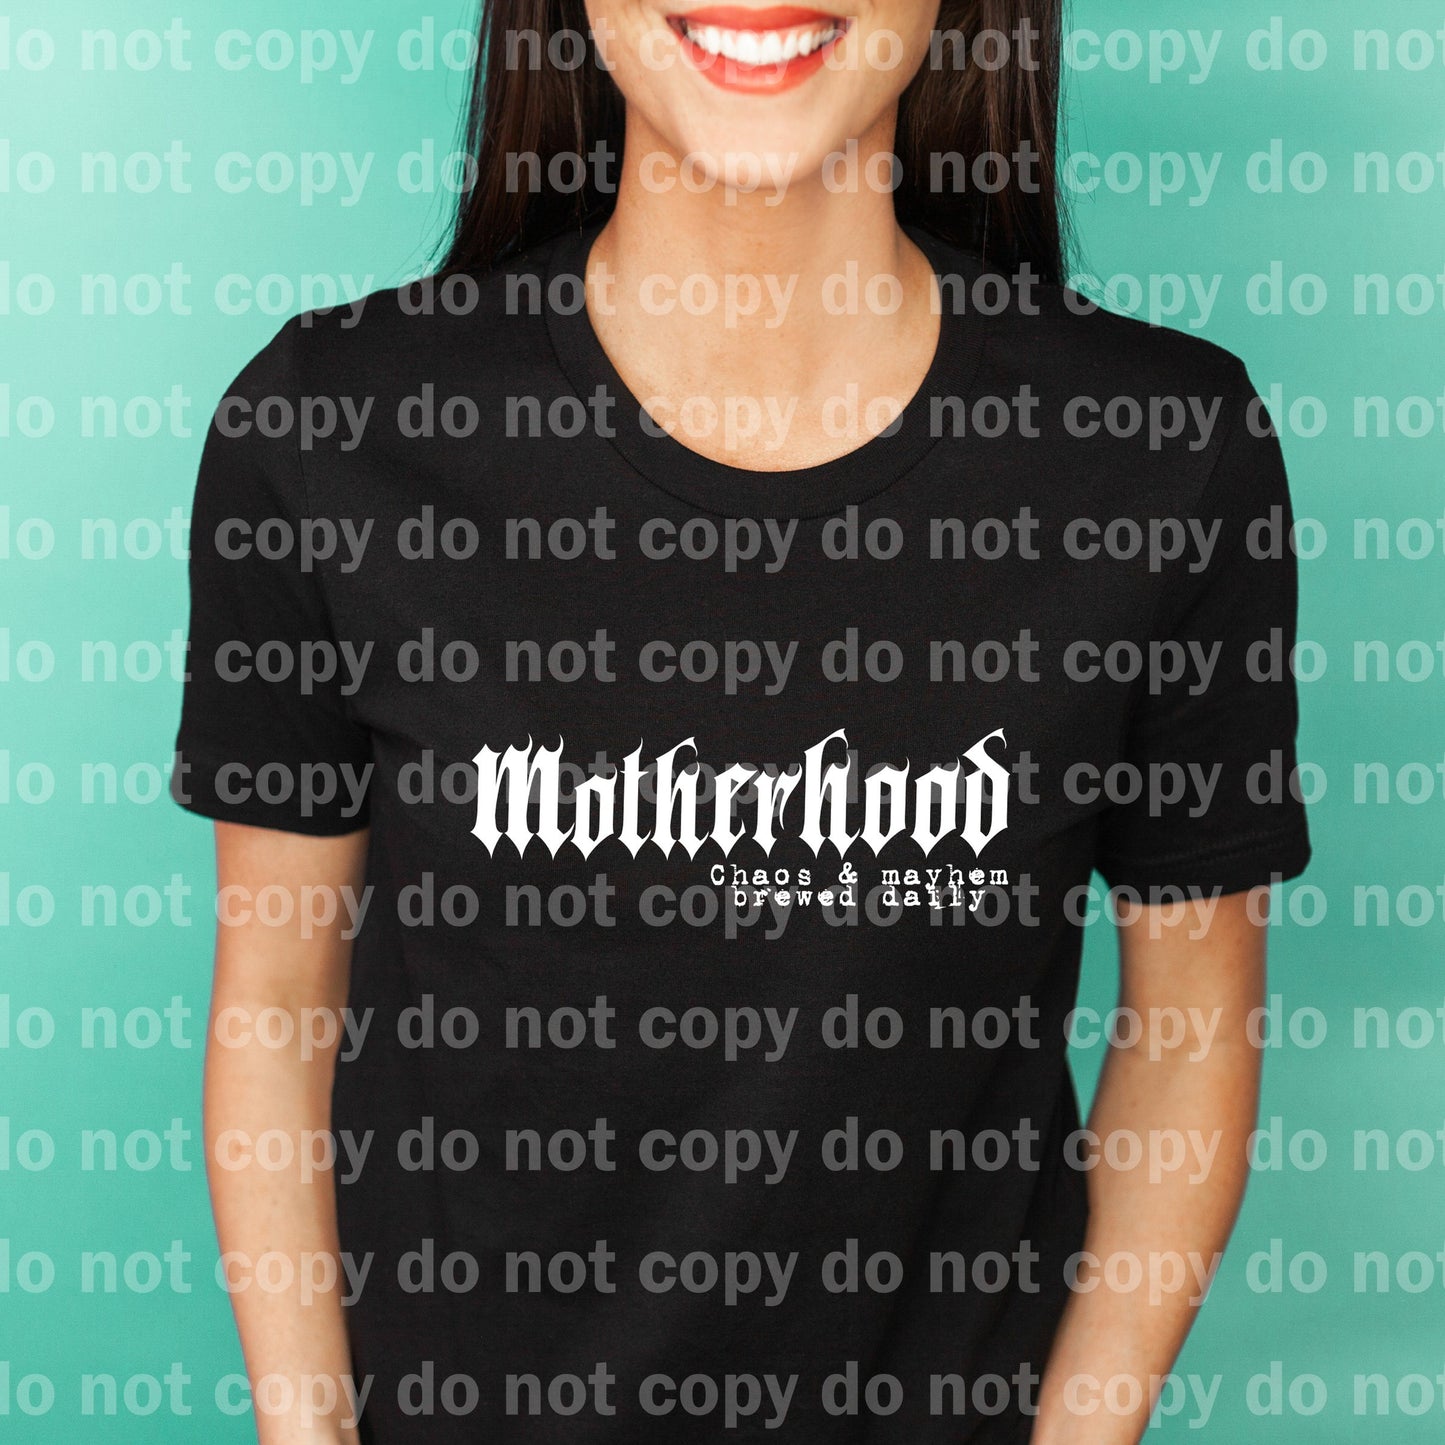 Motherhood Chaos and Mayhem Brewed Daily Black/White Dream Print or Sublimation Print